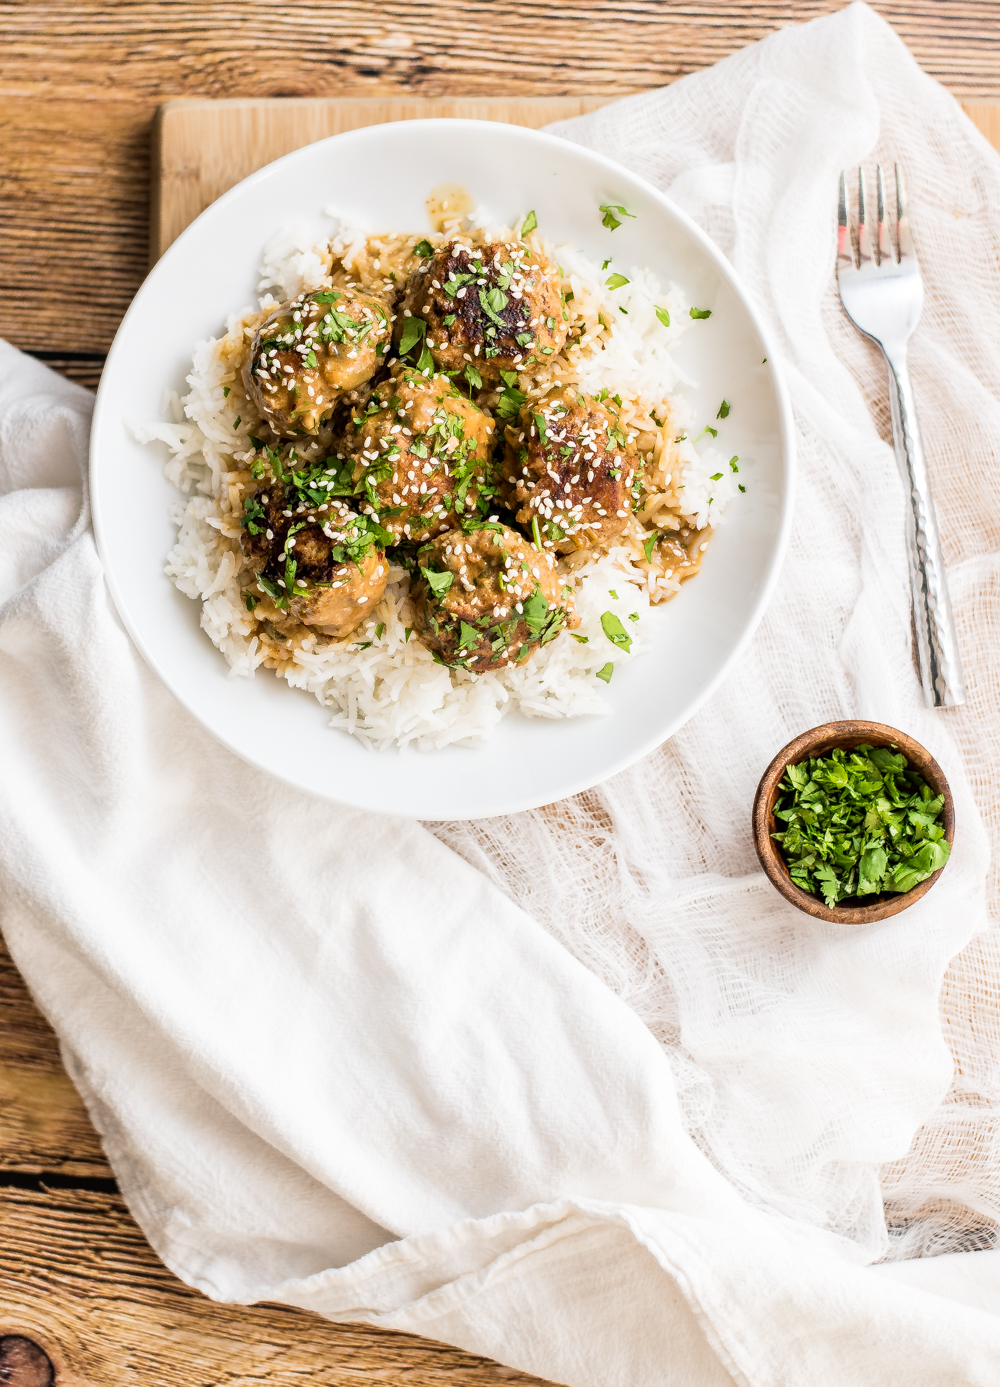 One pan turkey zucchini meatballs in Bangkok peanut sauce™ is the perfect weeknight meal. It is popping with texture and doesn't lack in flavor thanks to House of Tsang's Bangkok Peanut Sauce™!